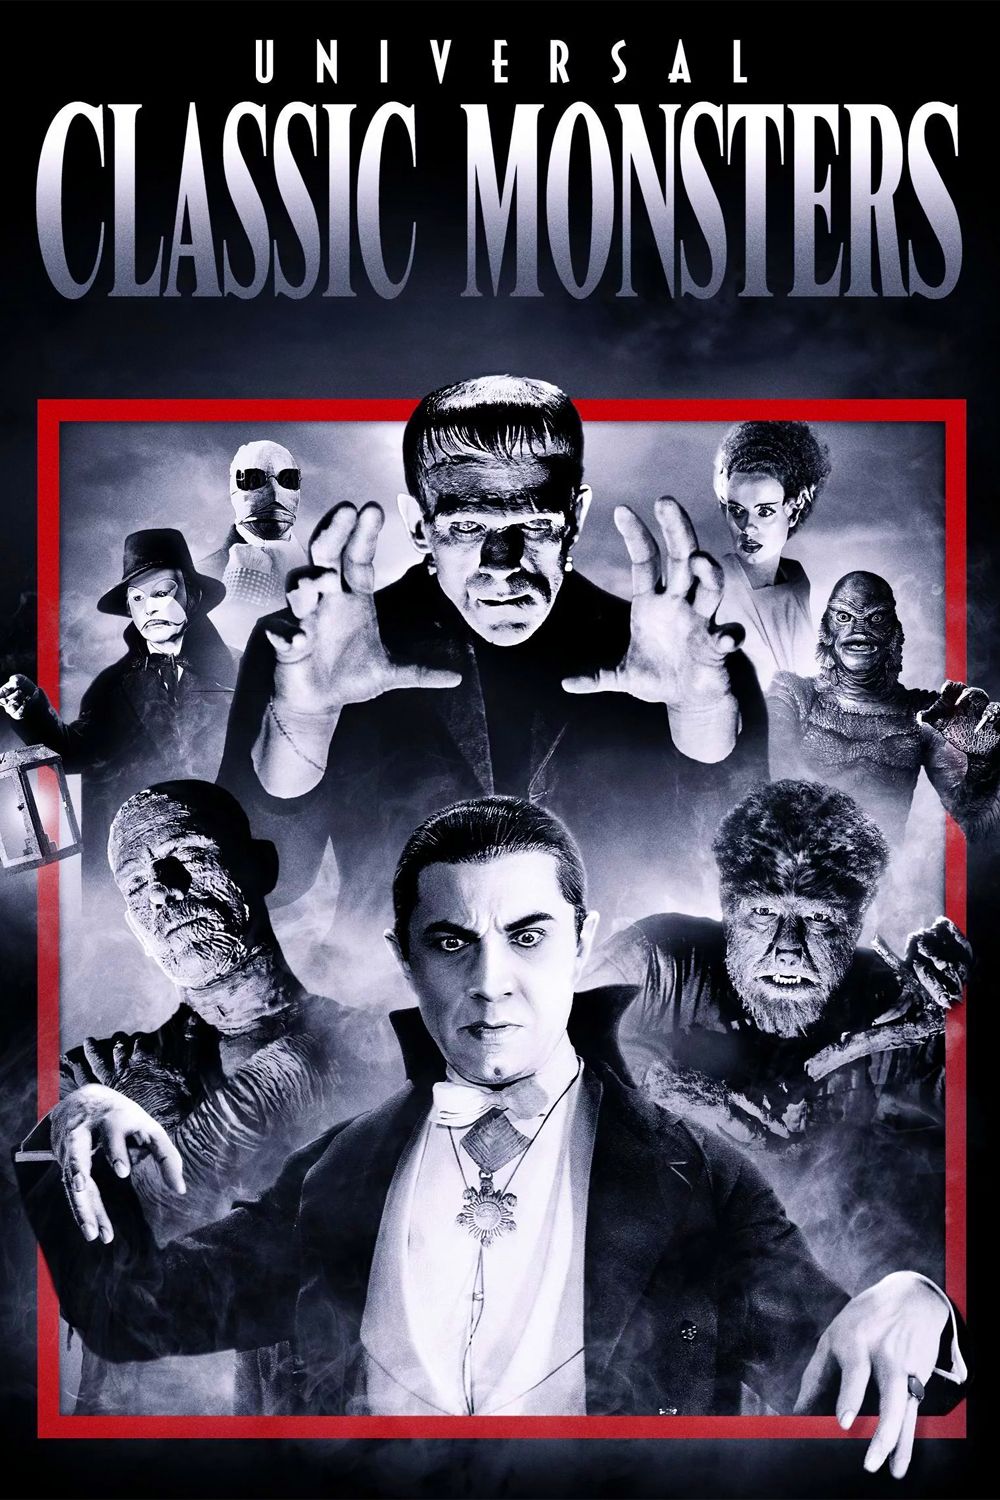 Universal Classic Monsters Poster Featuring Dracula, Frankenstein, Bride of Frankenstein, The Gill-Man, The Mummy, The Phantom of the Opera, The Wolf Man, and The Invisible Man